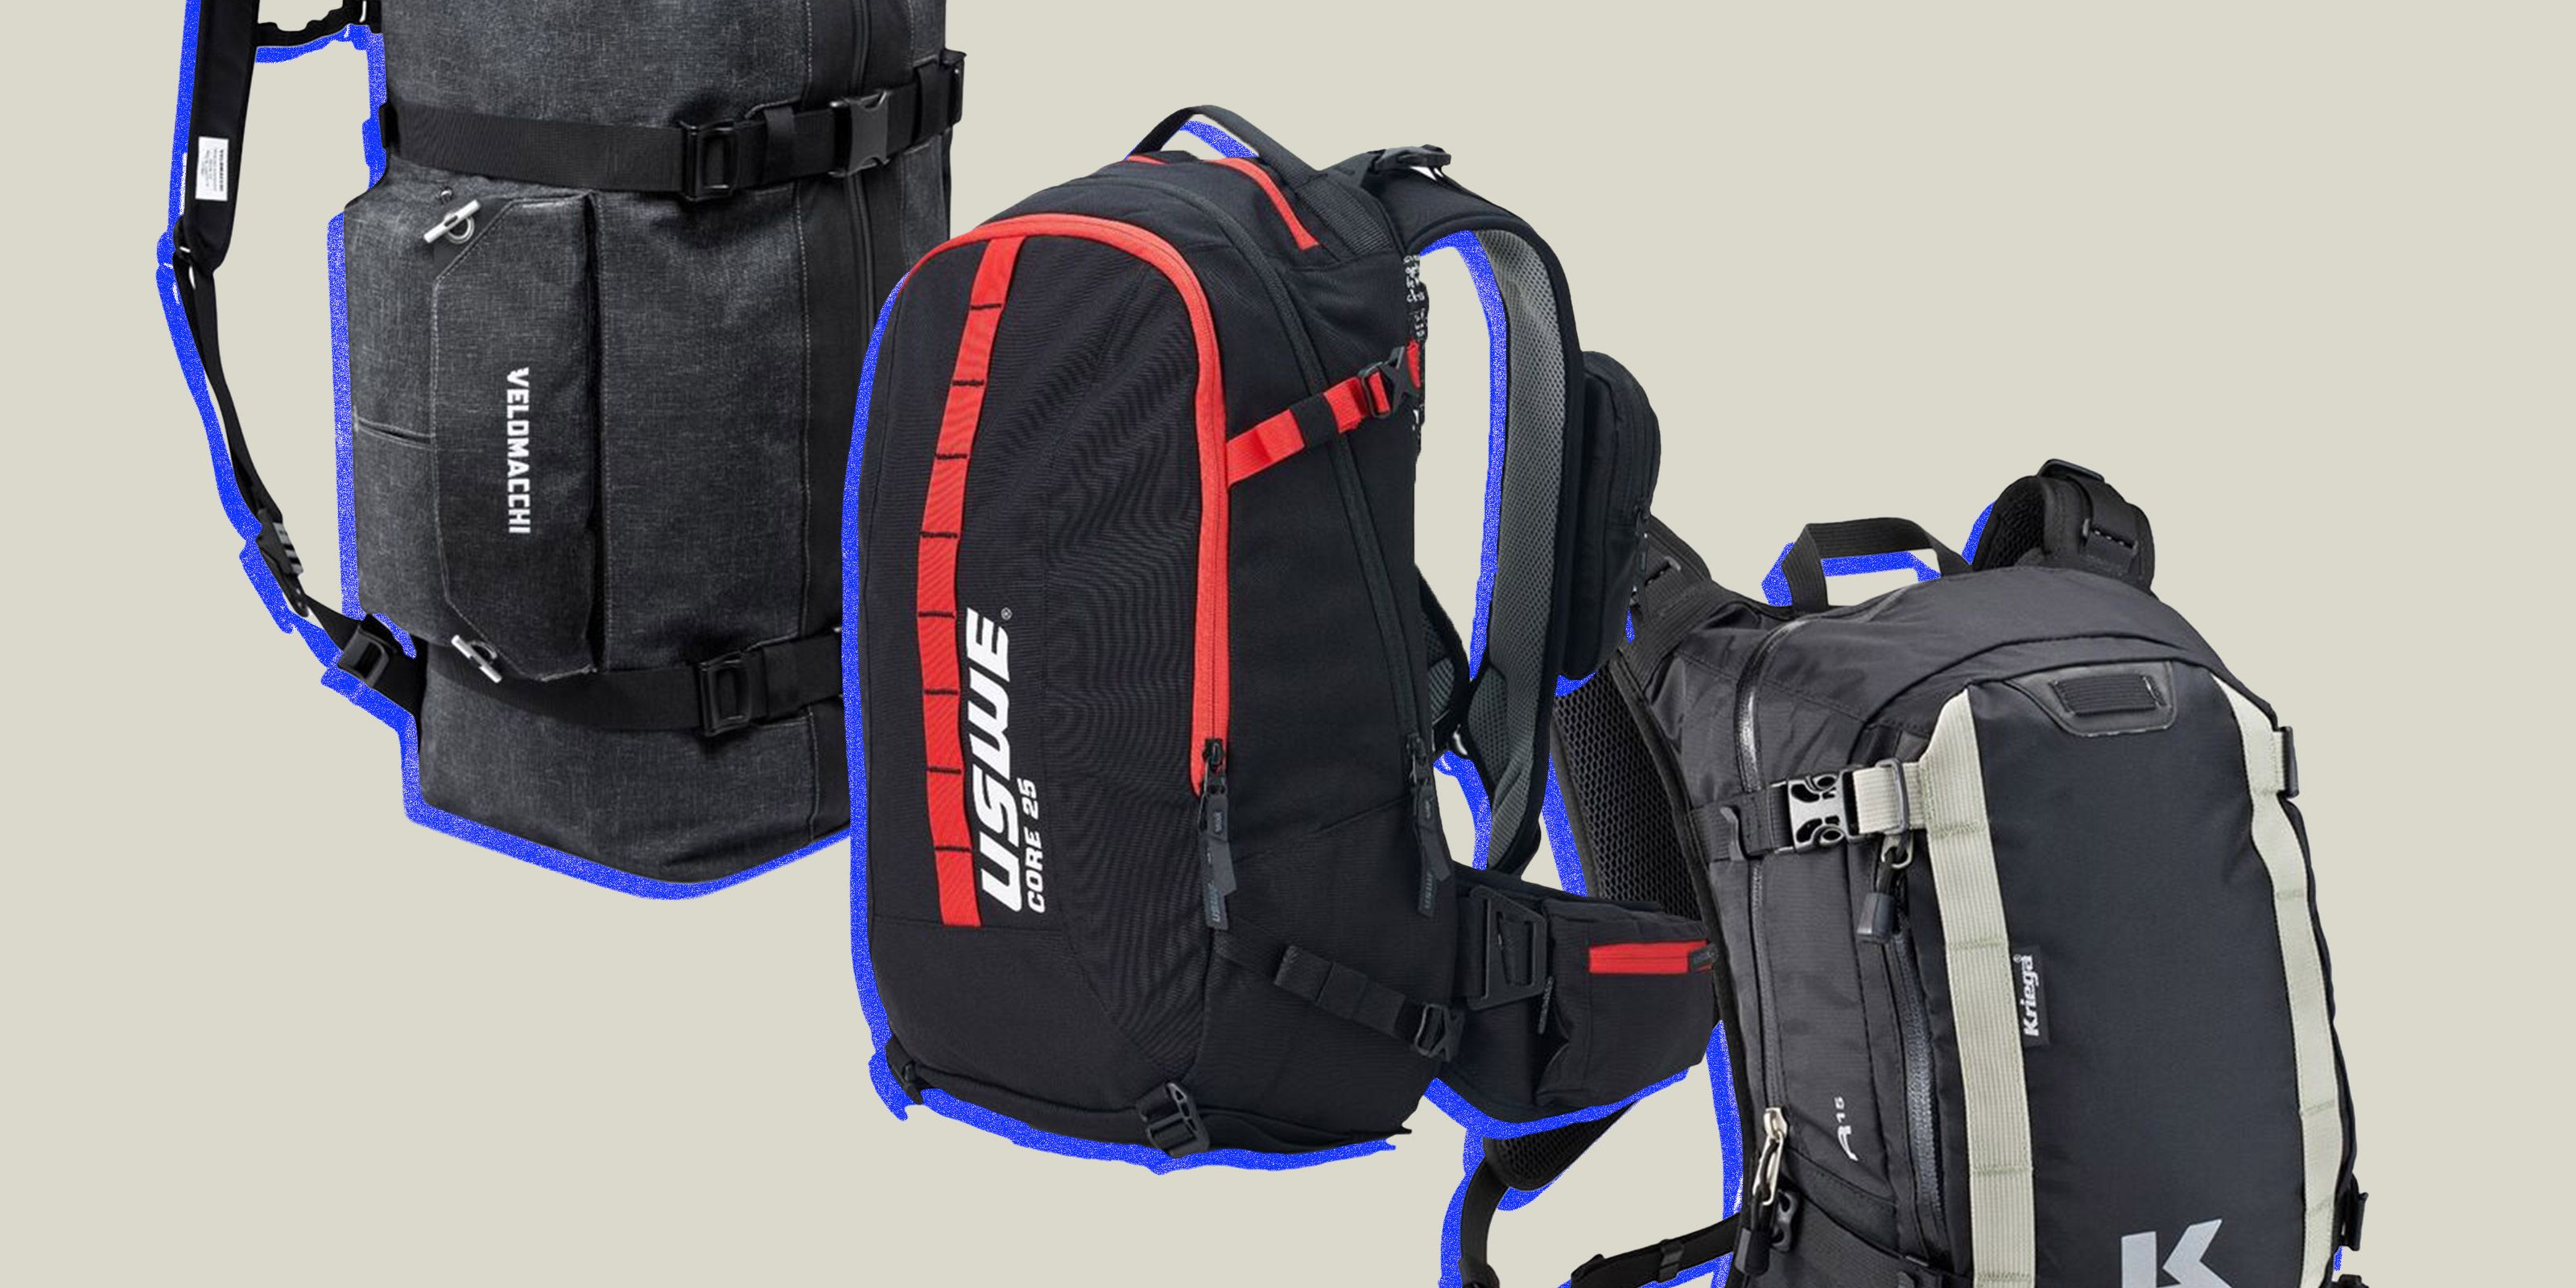 The Best Motorcycle Backpacks for Any Type of Rider and Riding